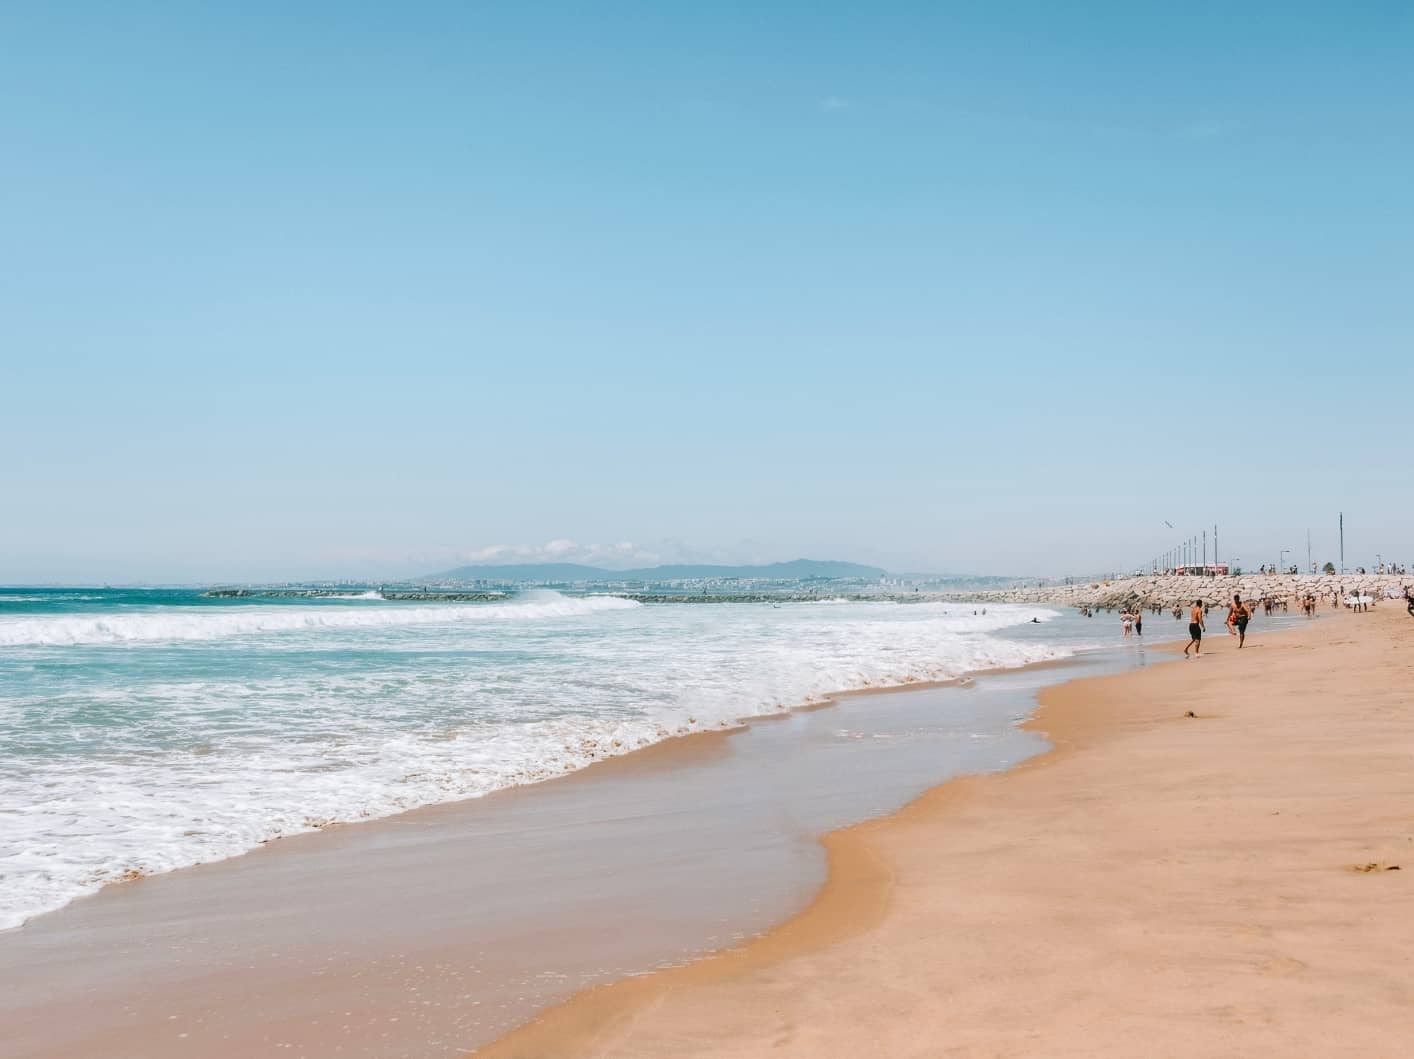 The beach in Costa da Caparica. A beach day is a great activity during your 5 days in Lisbon. 